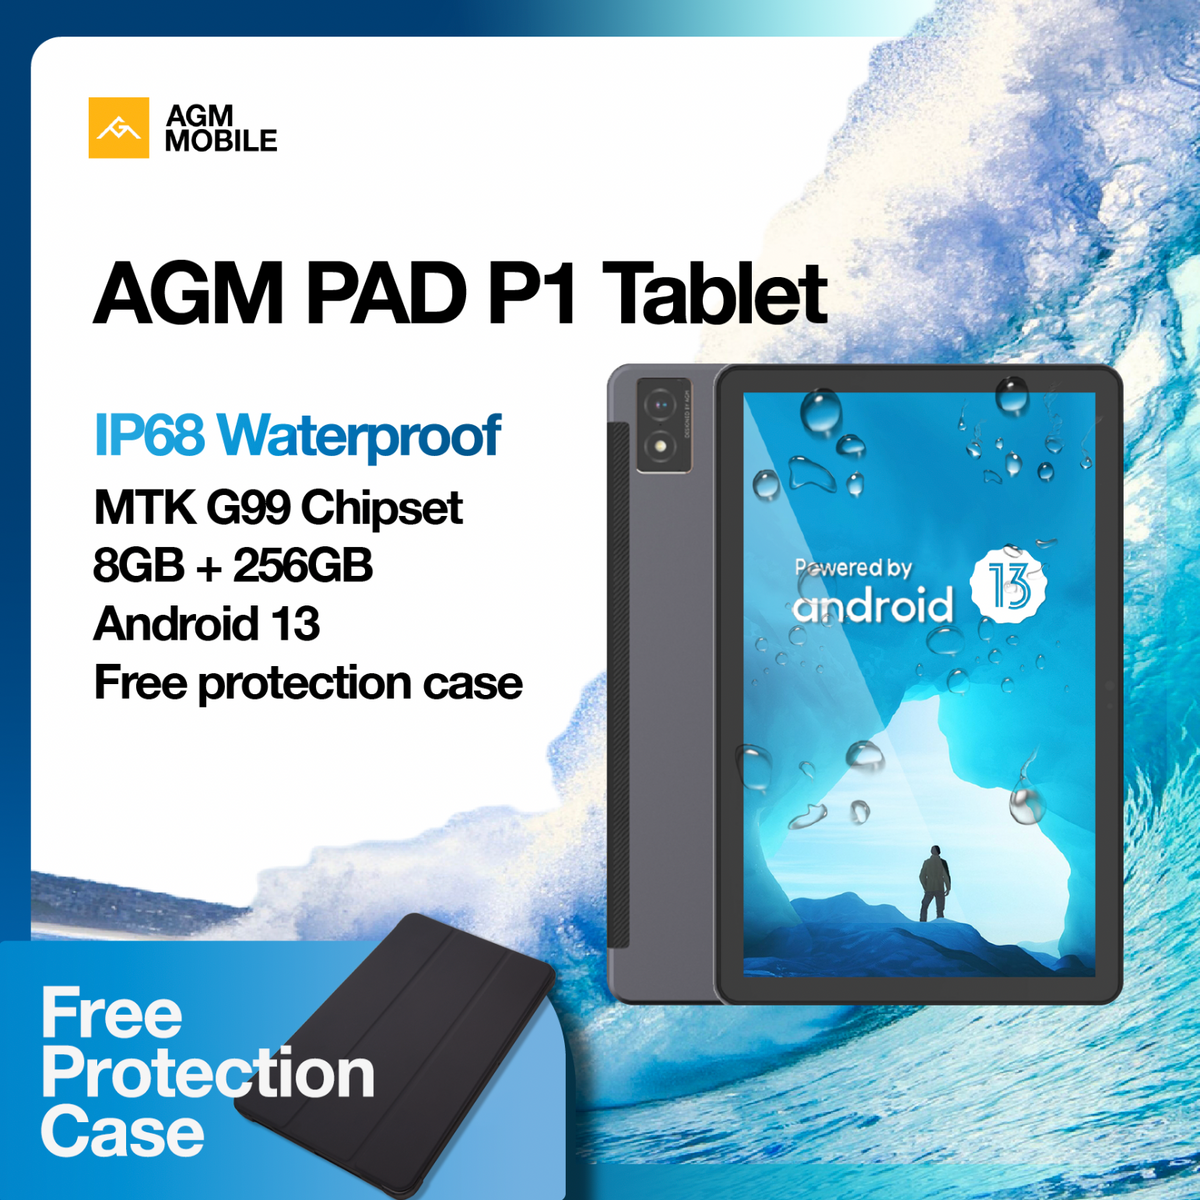 AGM PAD P1 | 4G LTE Waterproof Tablet | Powerful Chipset | Lightweight | 2K Resolution Display | Big Battery | Android 13